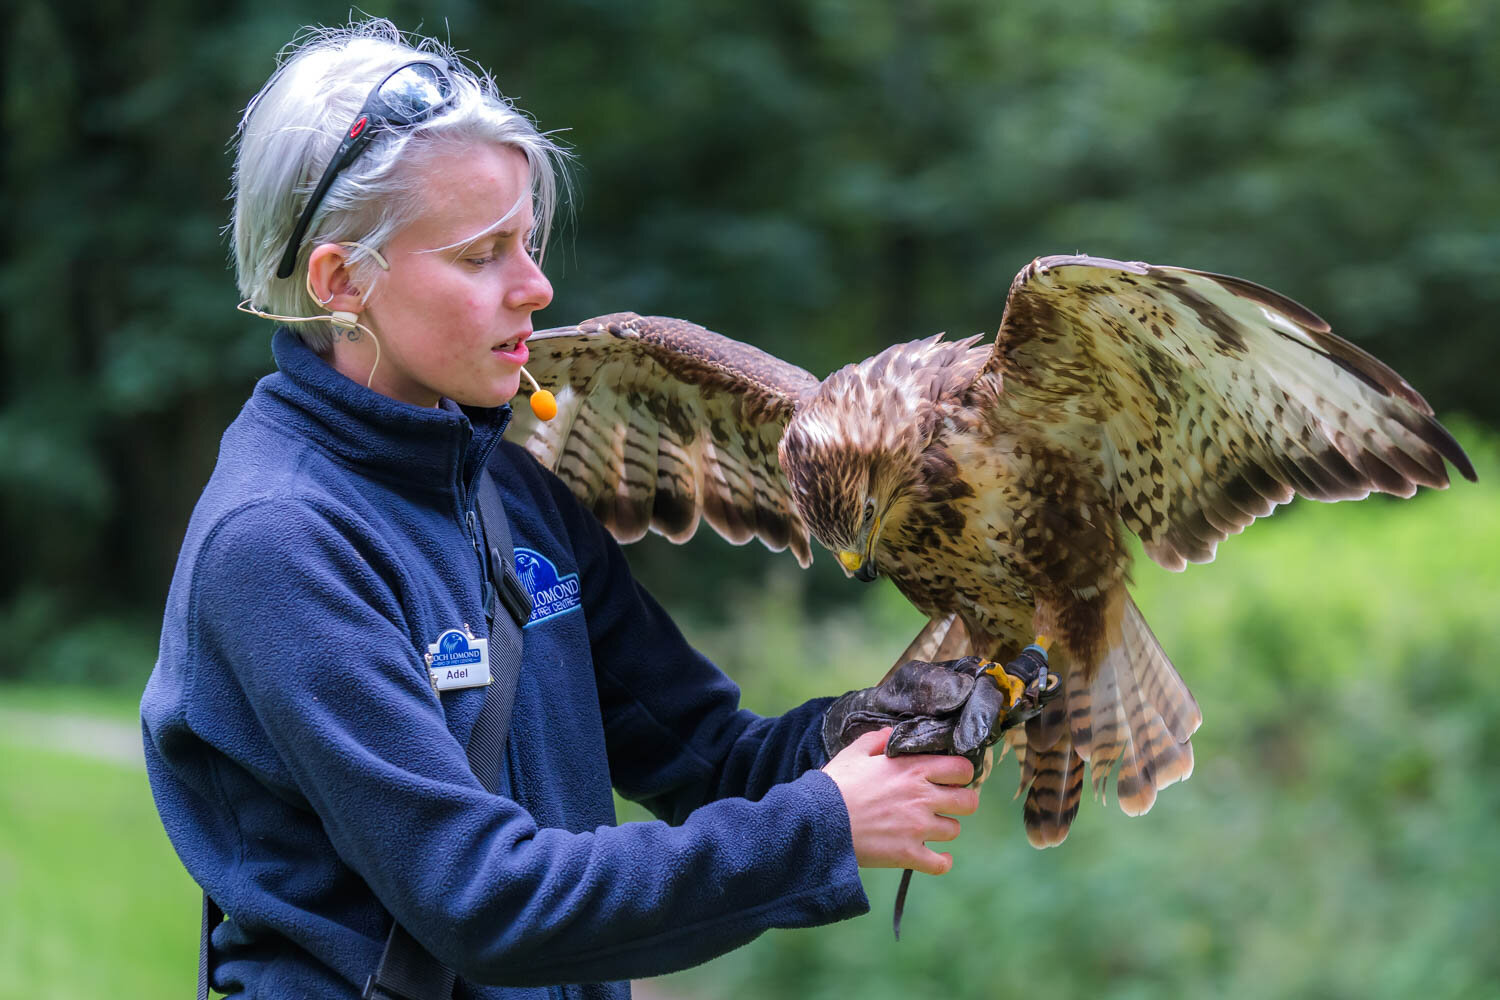 Opening Times & Prices for the National Centre for Birds of Prey